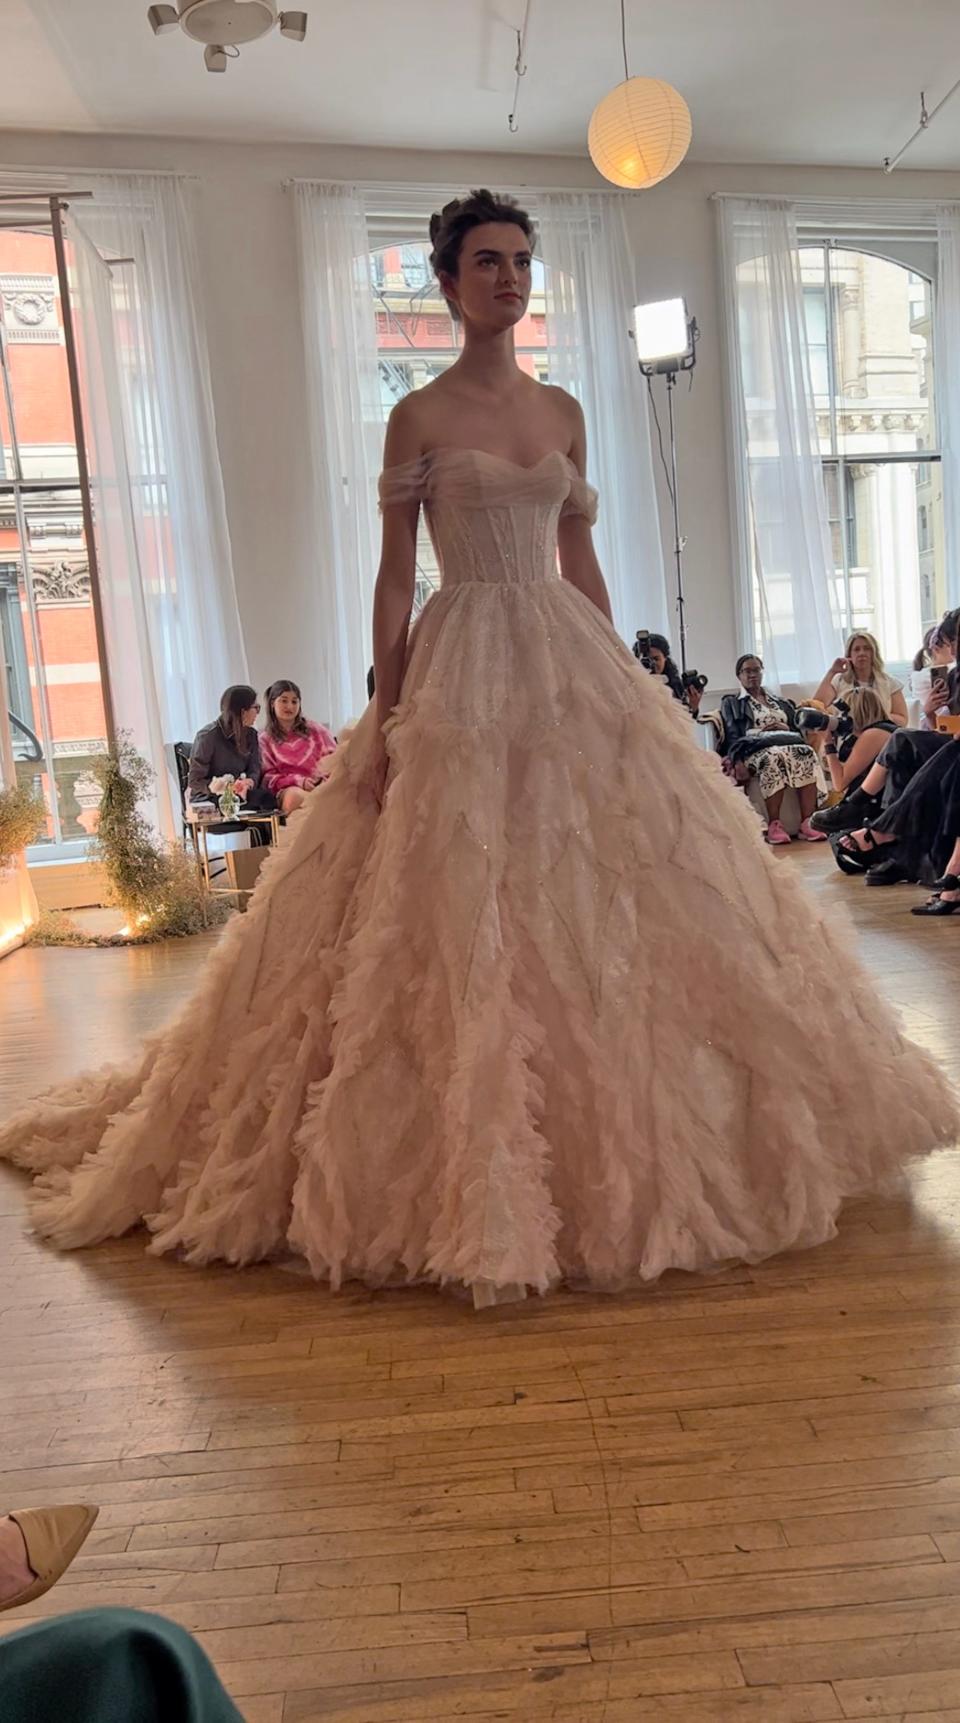 A woman poses in an off-the-shoulder pink wedding dress.